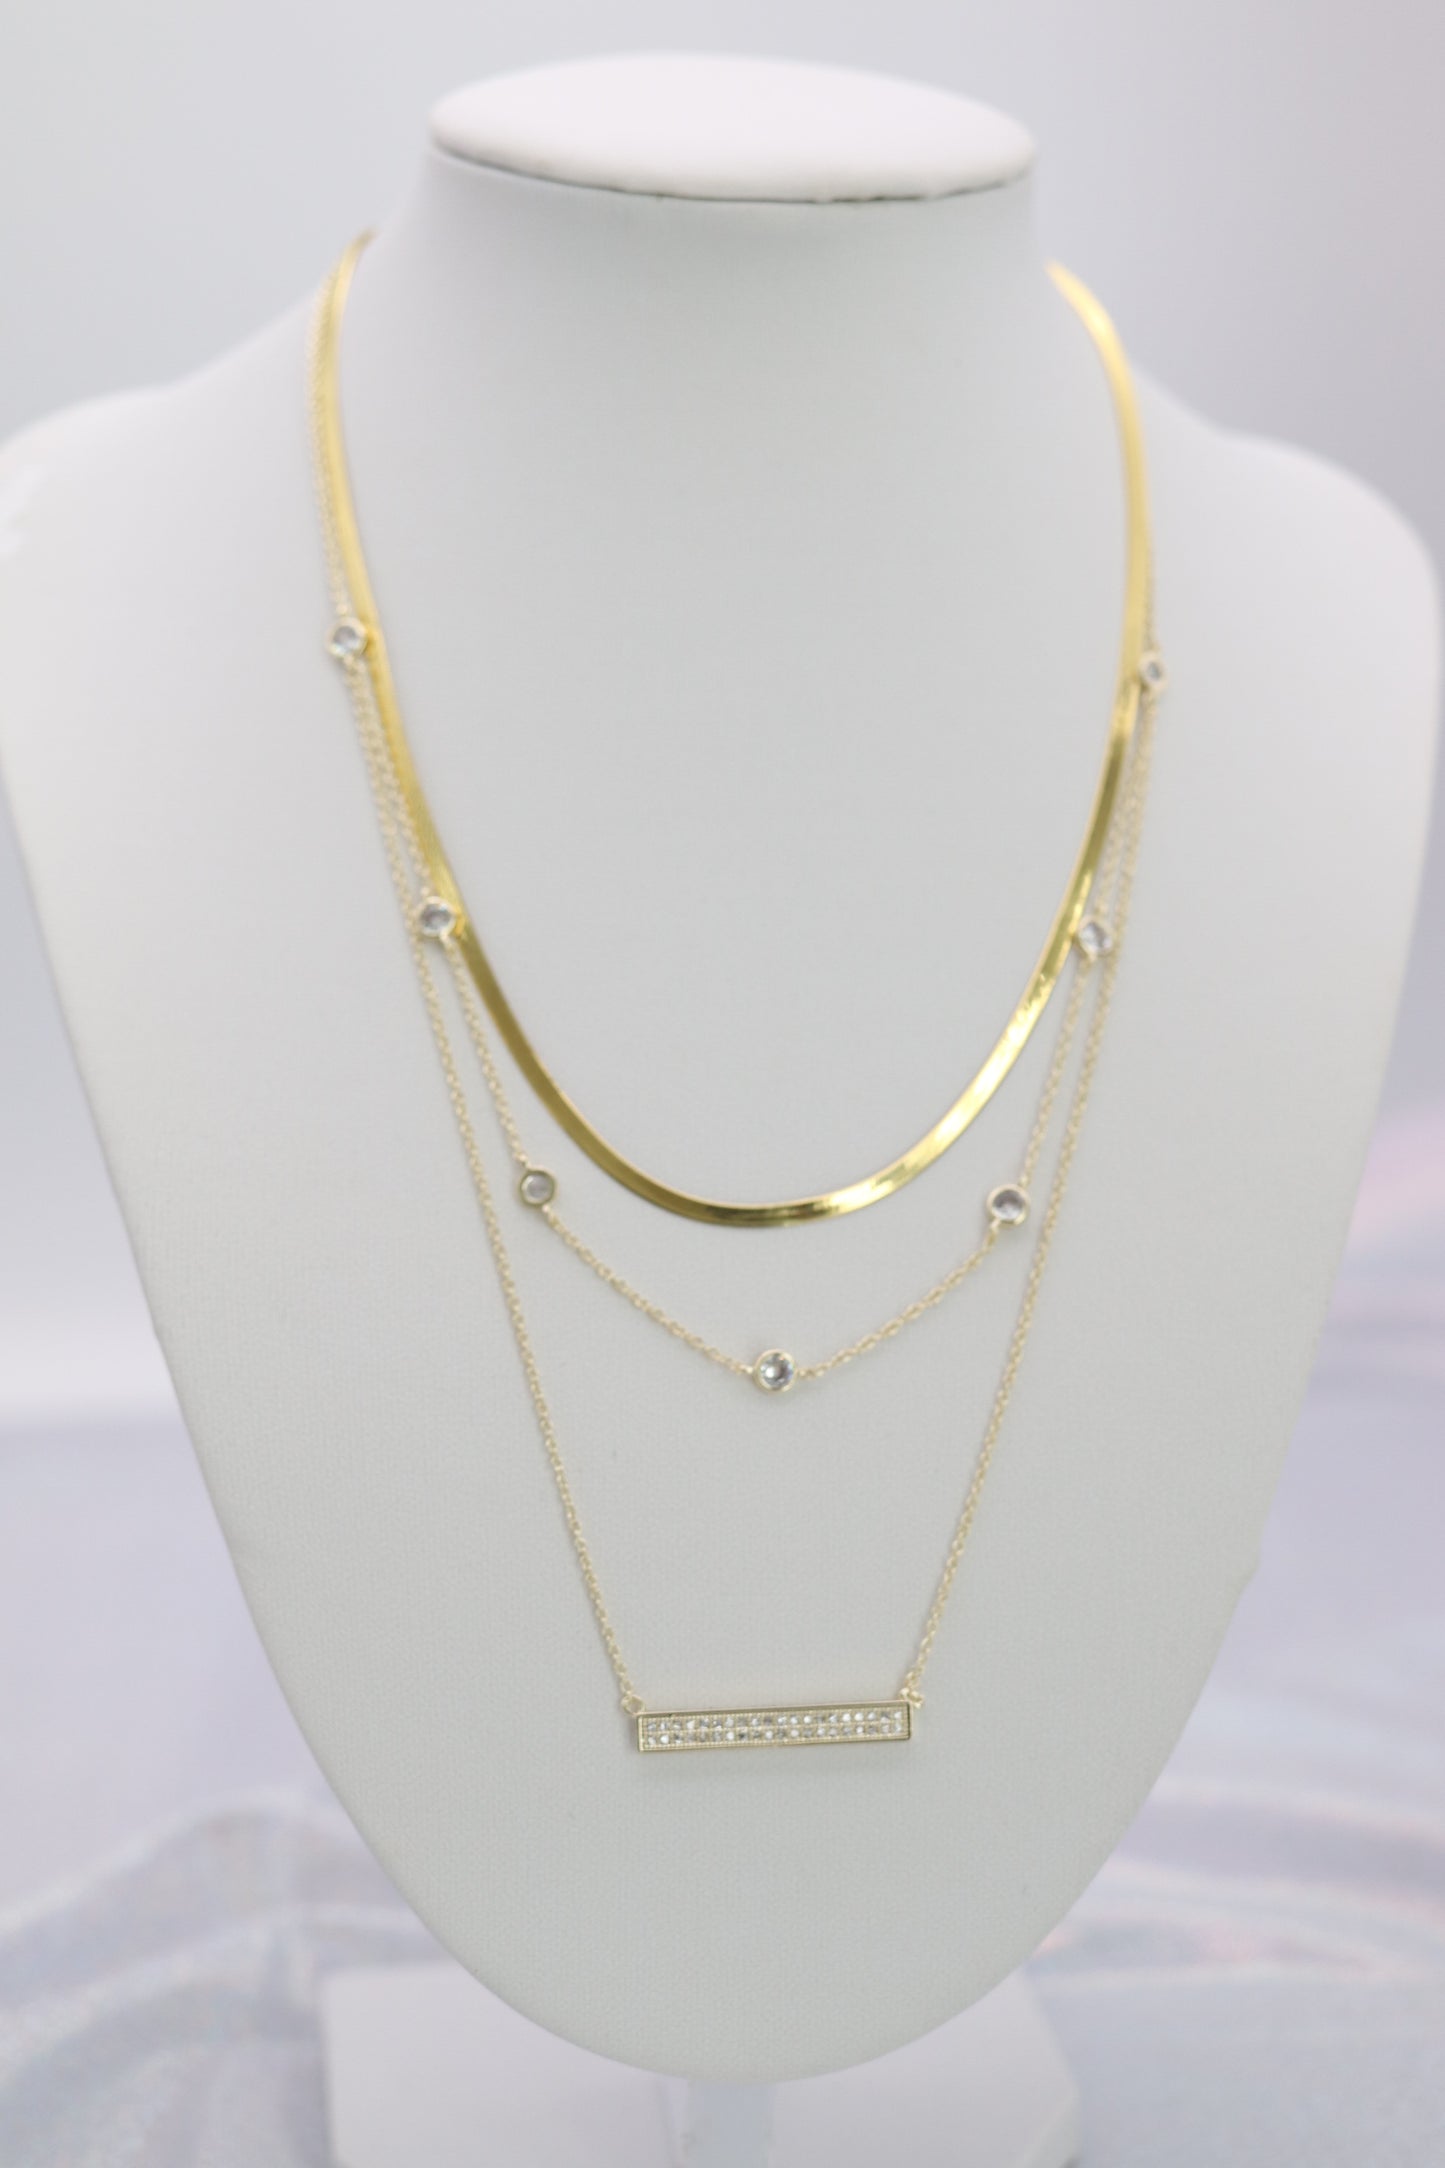 Triple Gold Layered Necklace with Pave CZ Delicate Bar